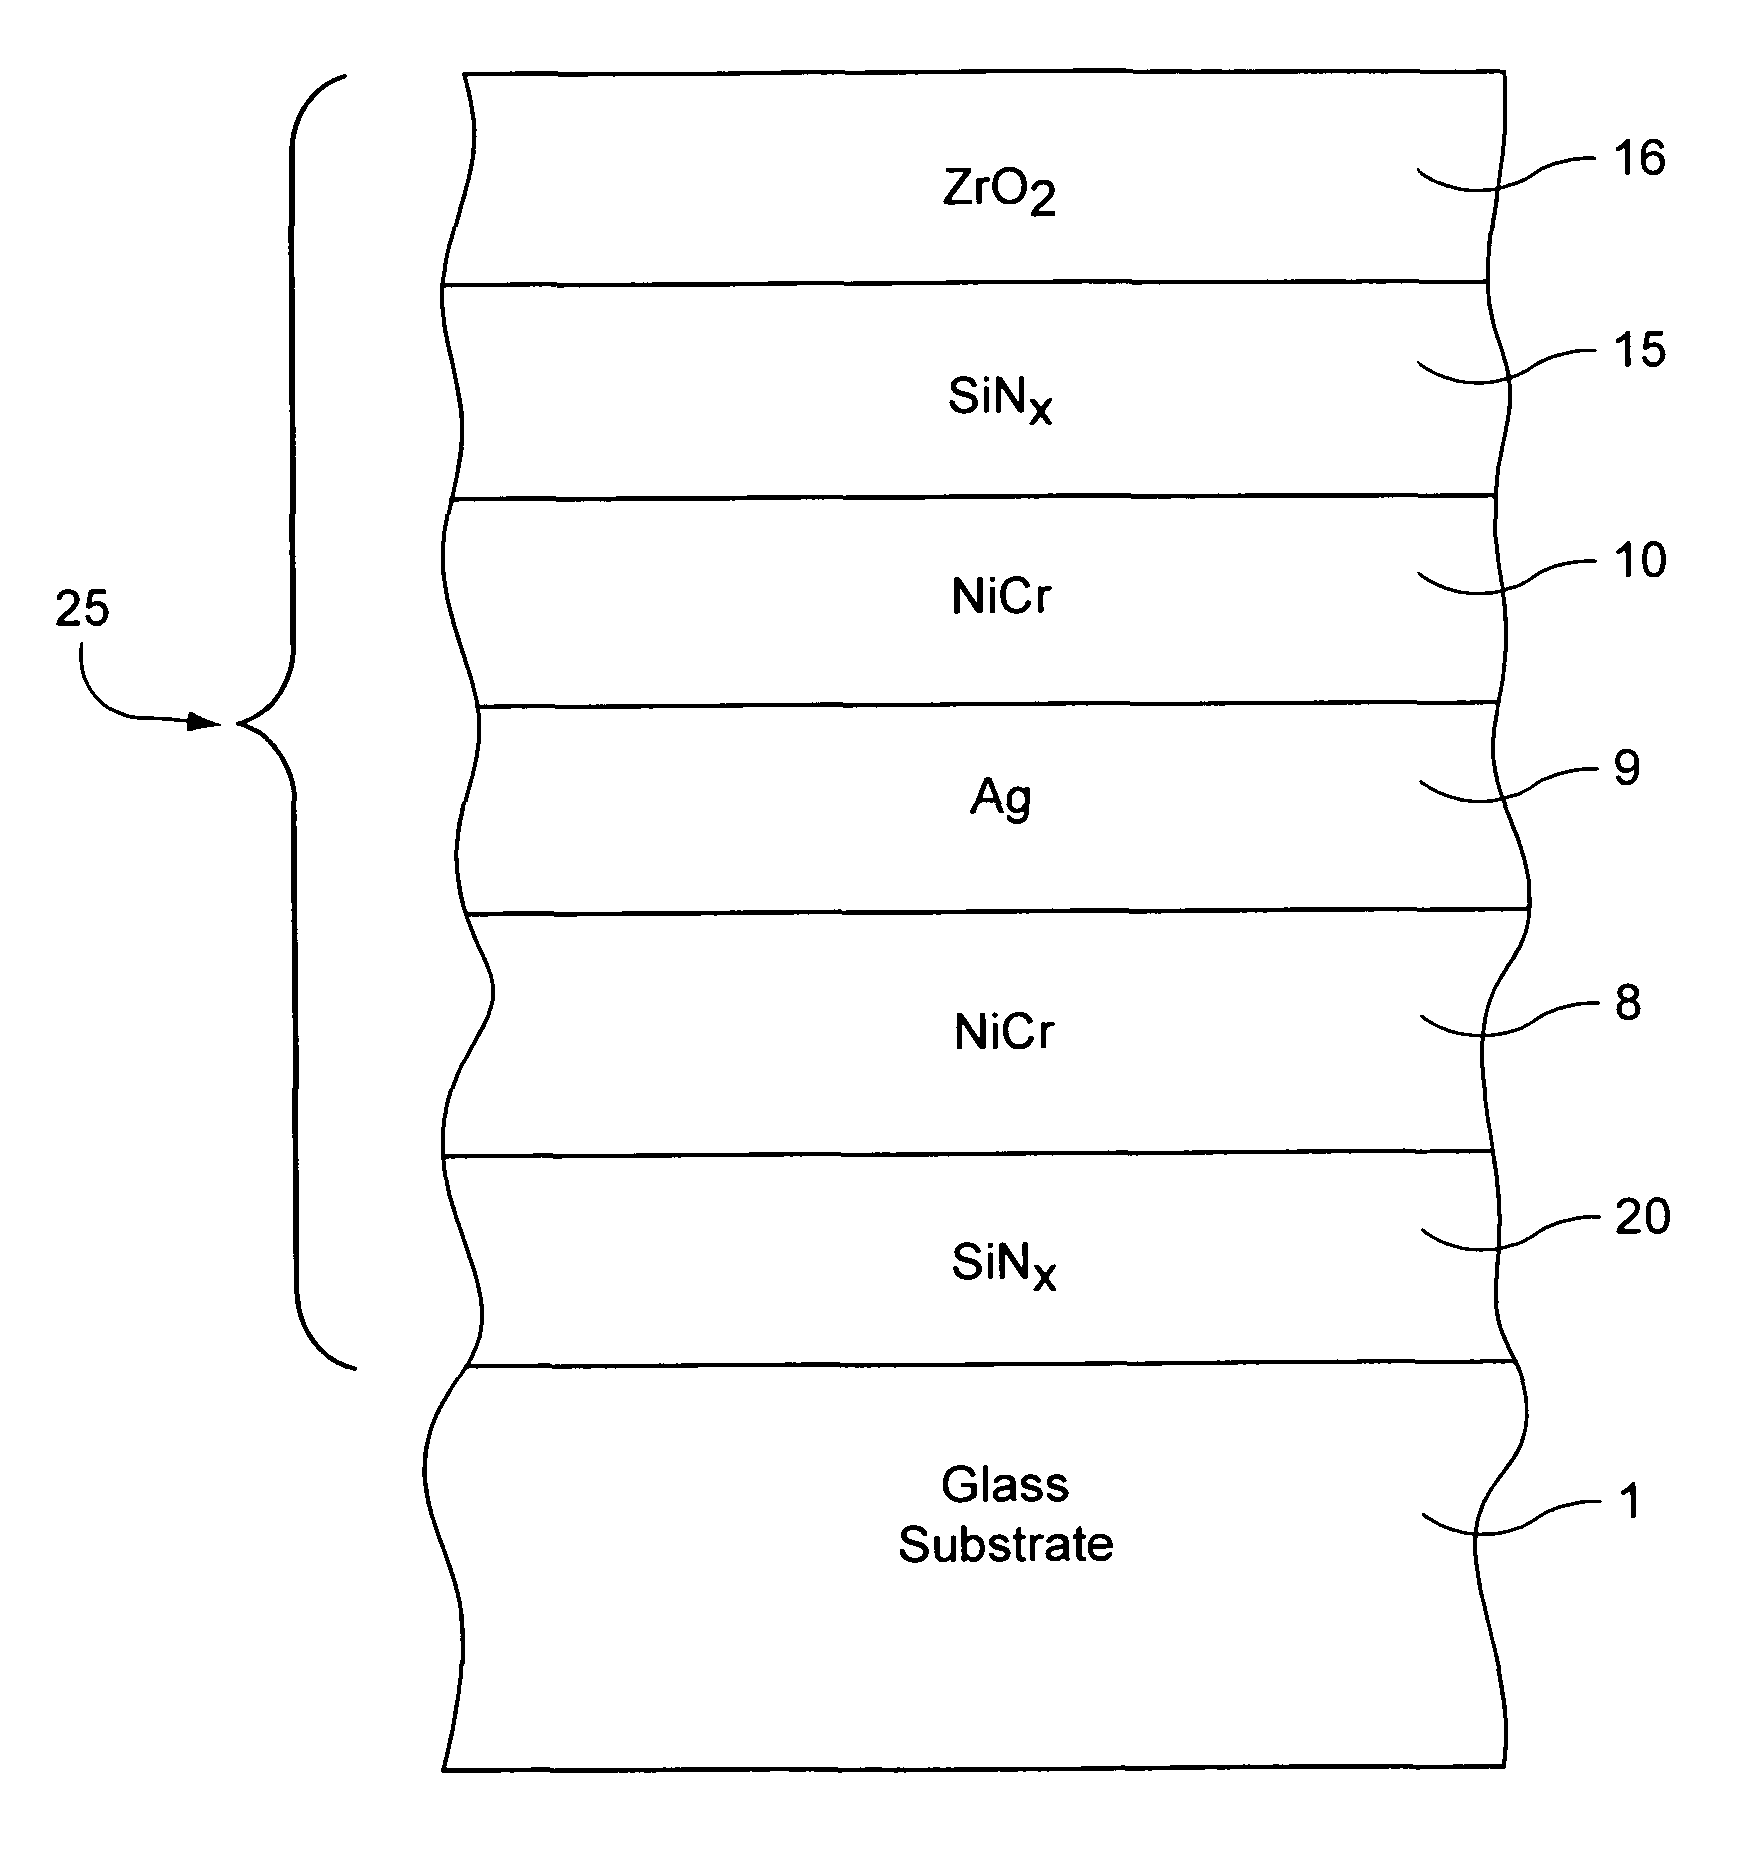 Coated article with low-E coating including zirconium oxide and/or zirconium silicon oxynitride and methods of making same